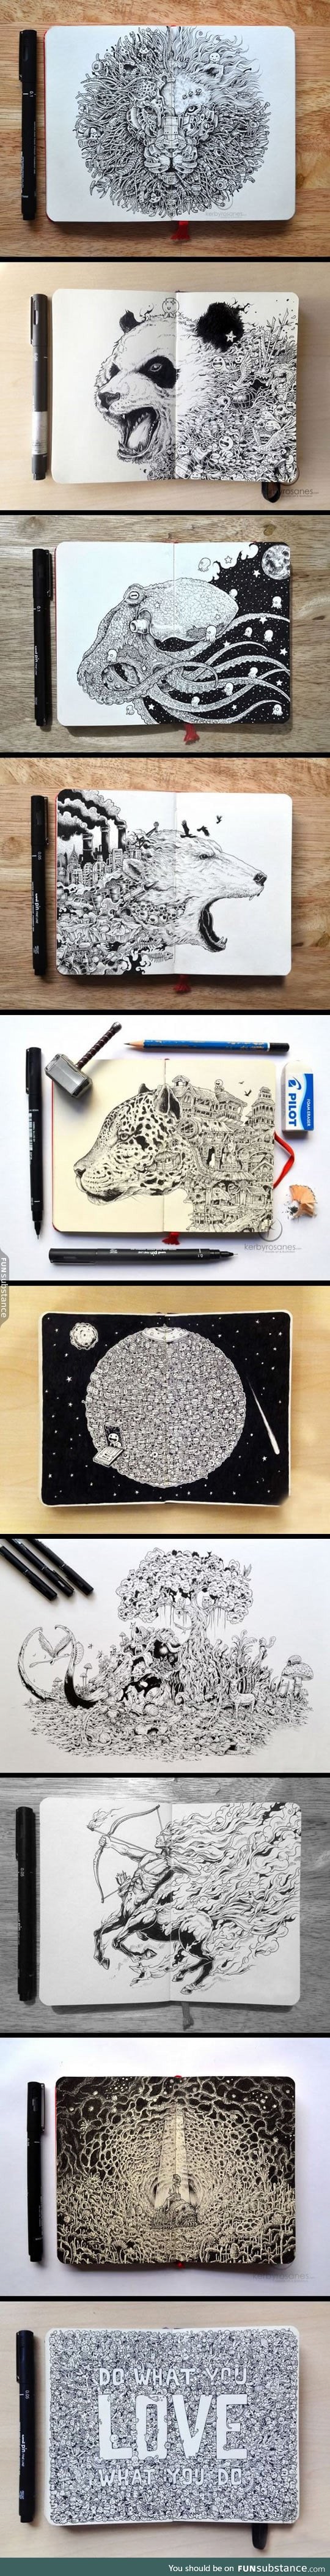 These hyper-detailed drawings are awesome